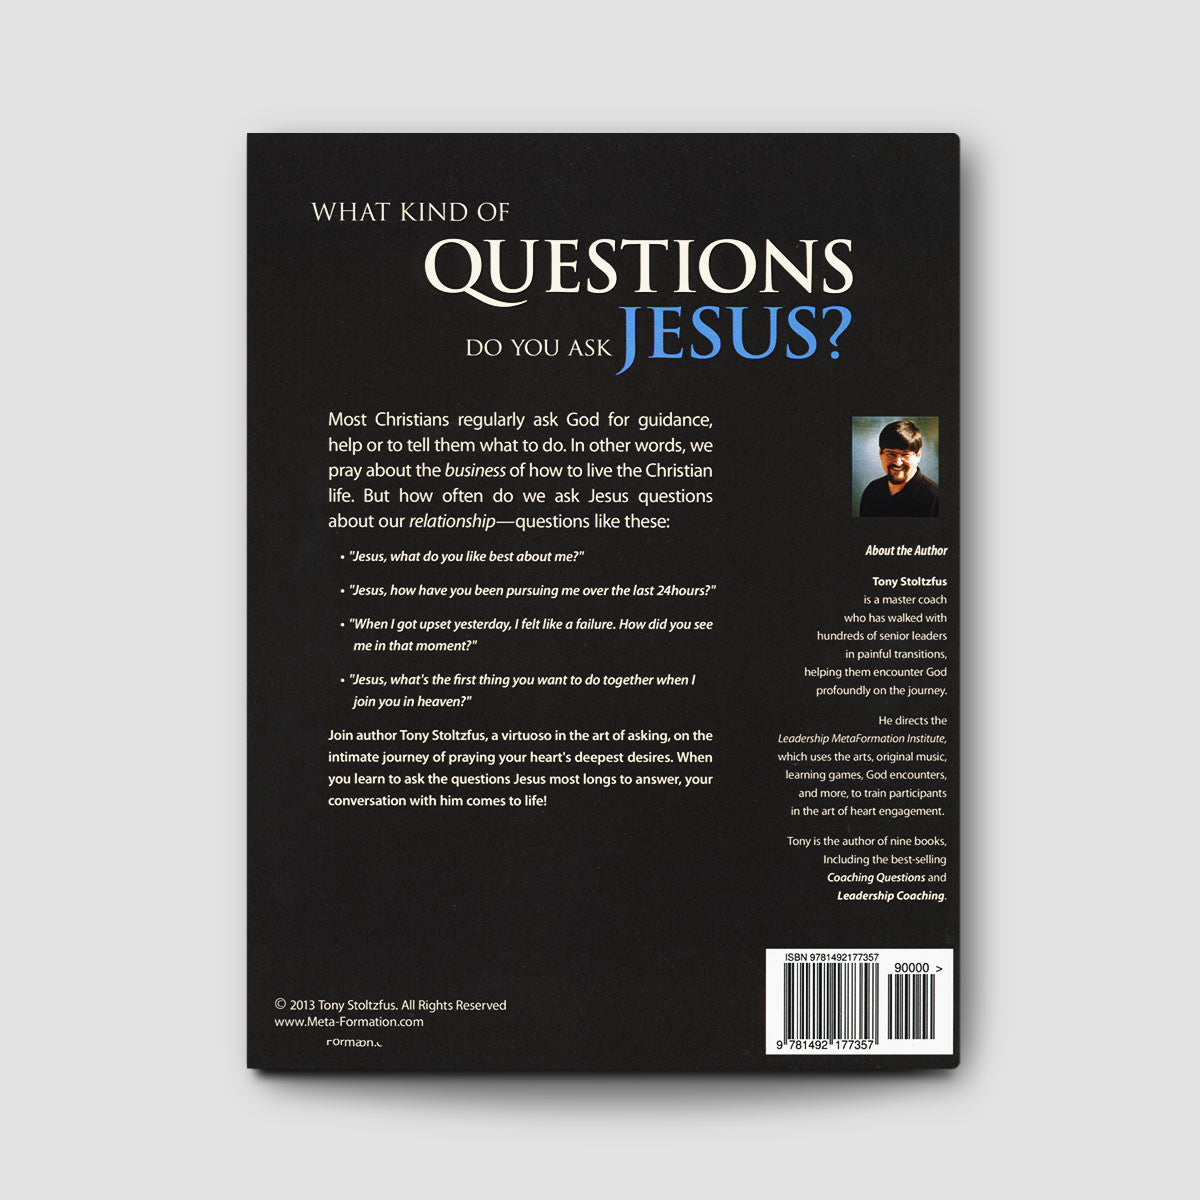 Questions for Jesus